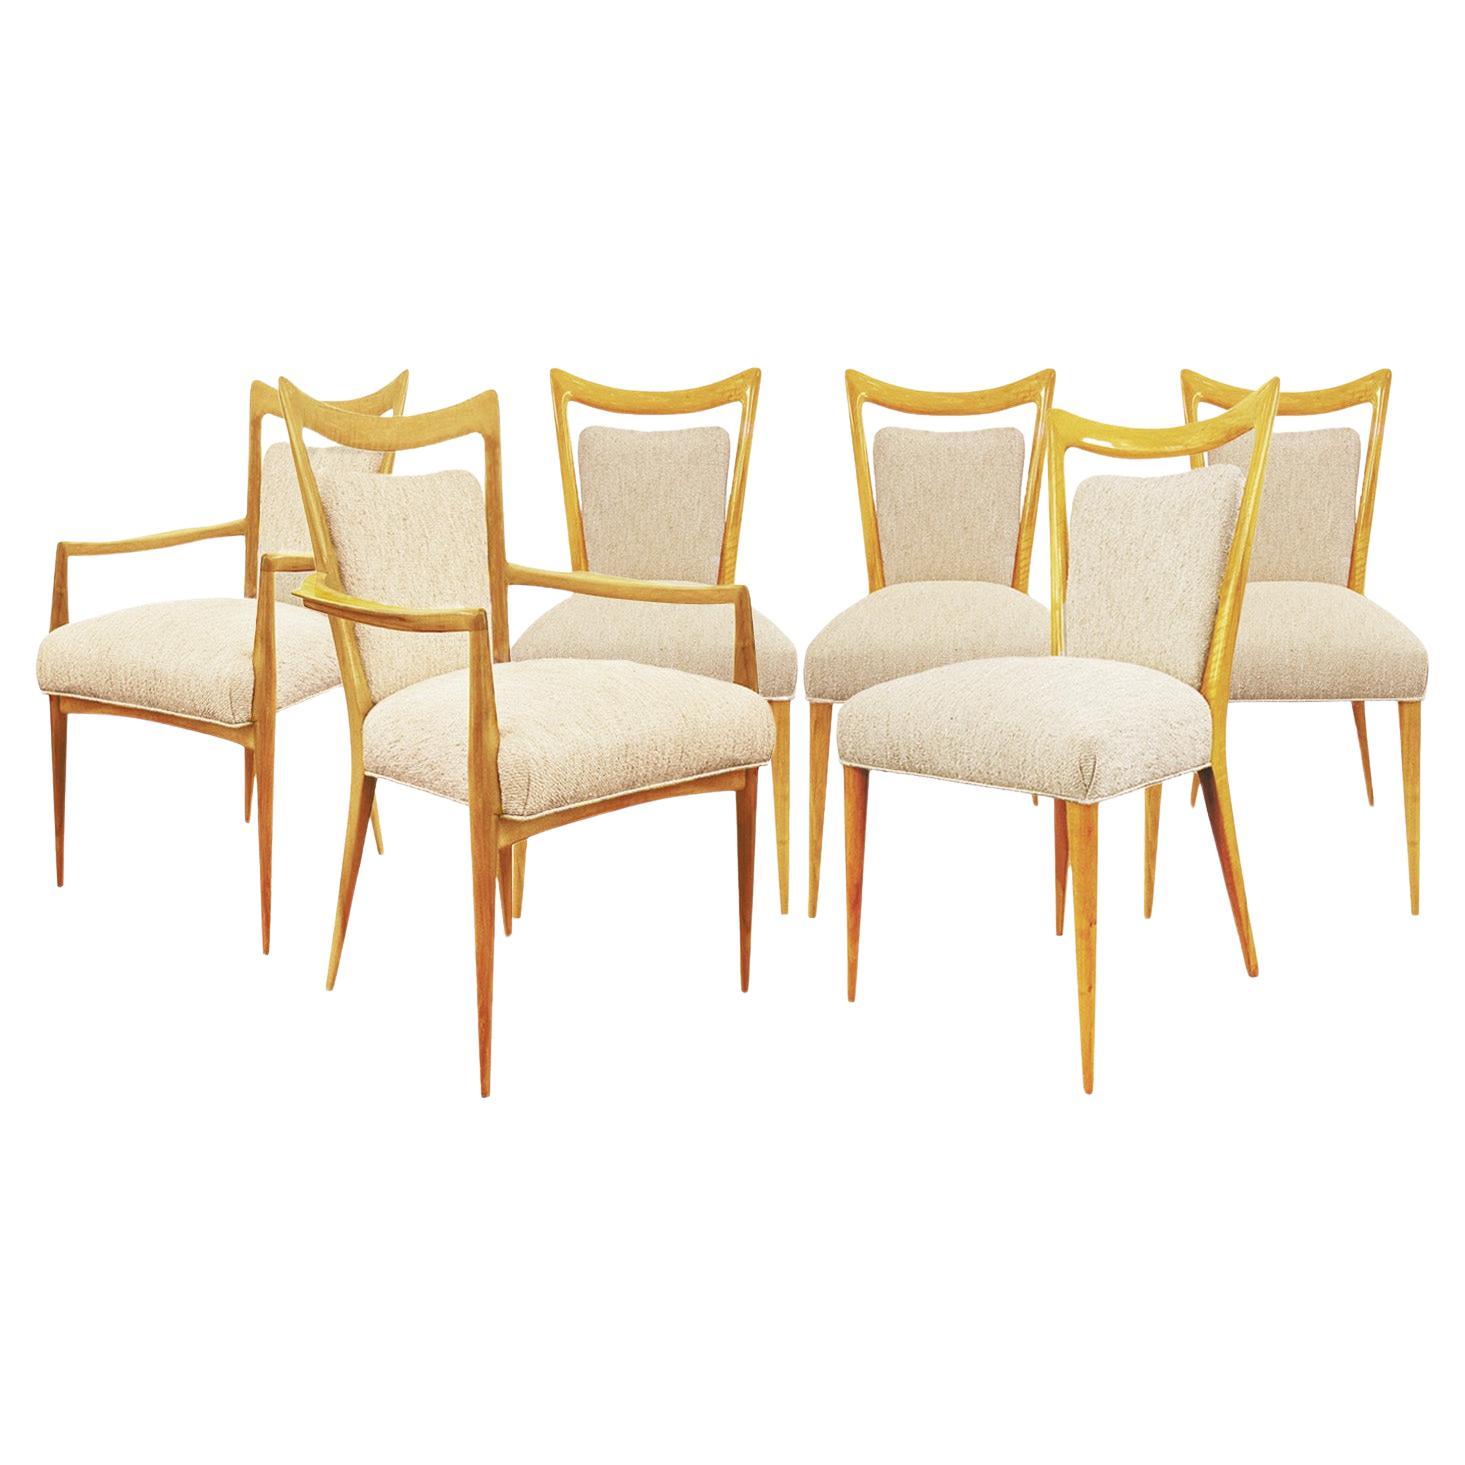 Melchiorre Bega Dining Room Chairs